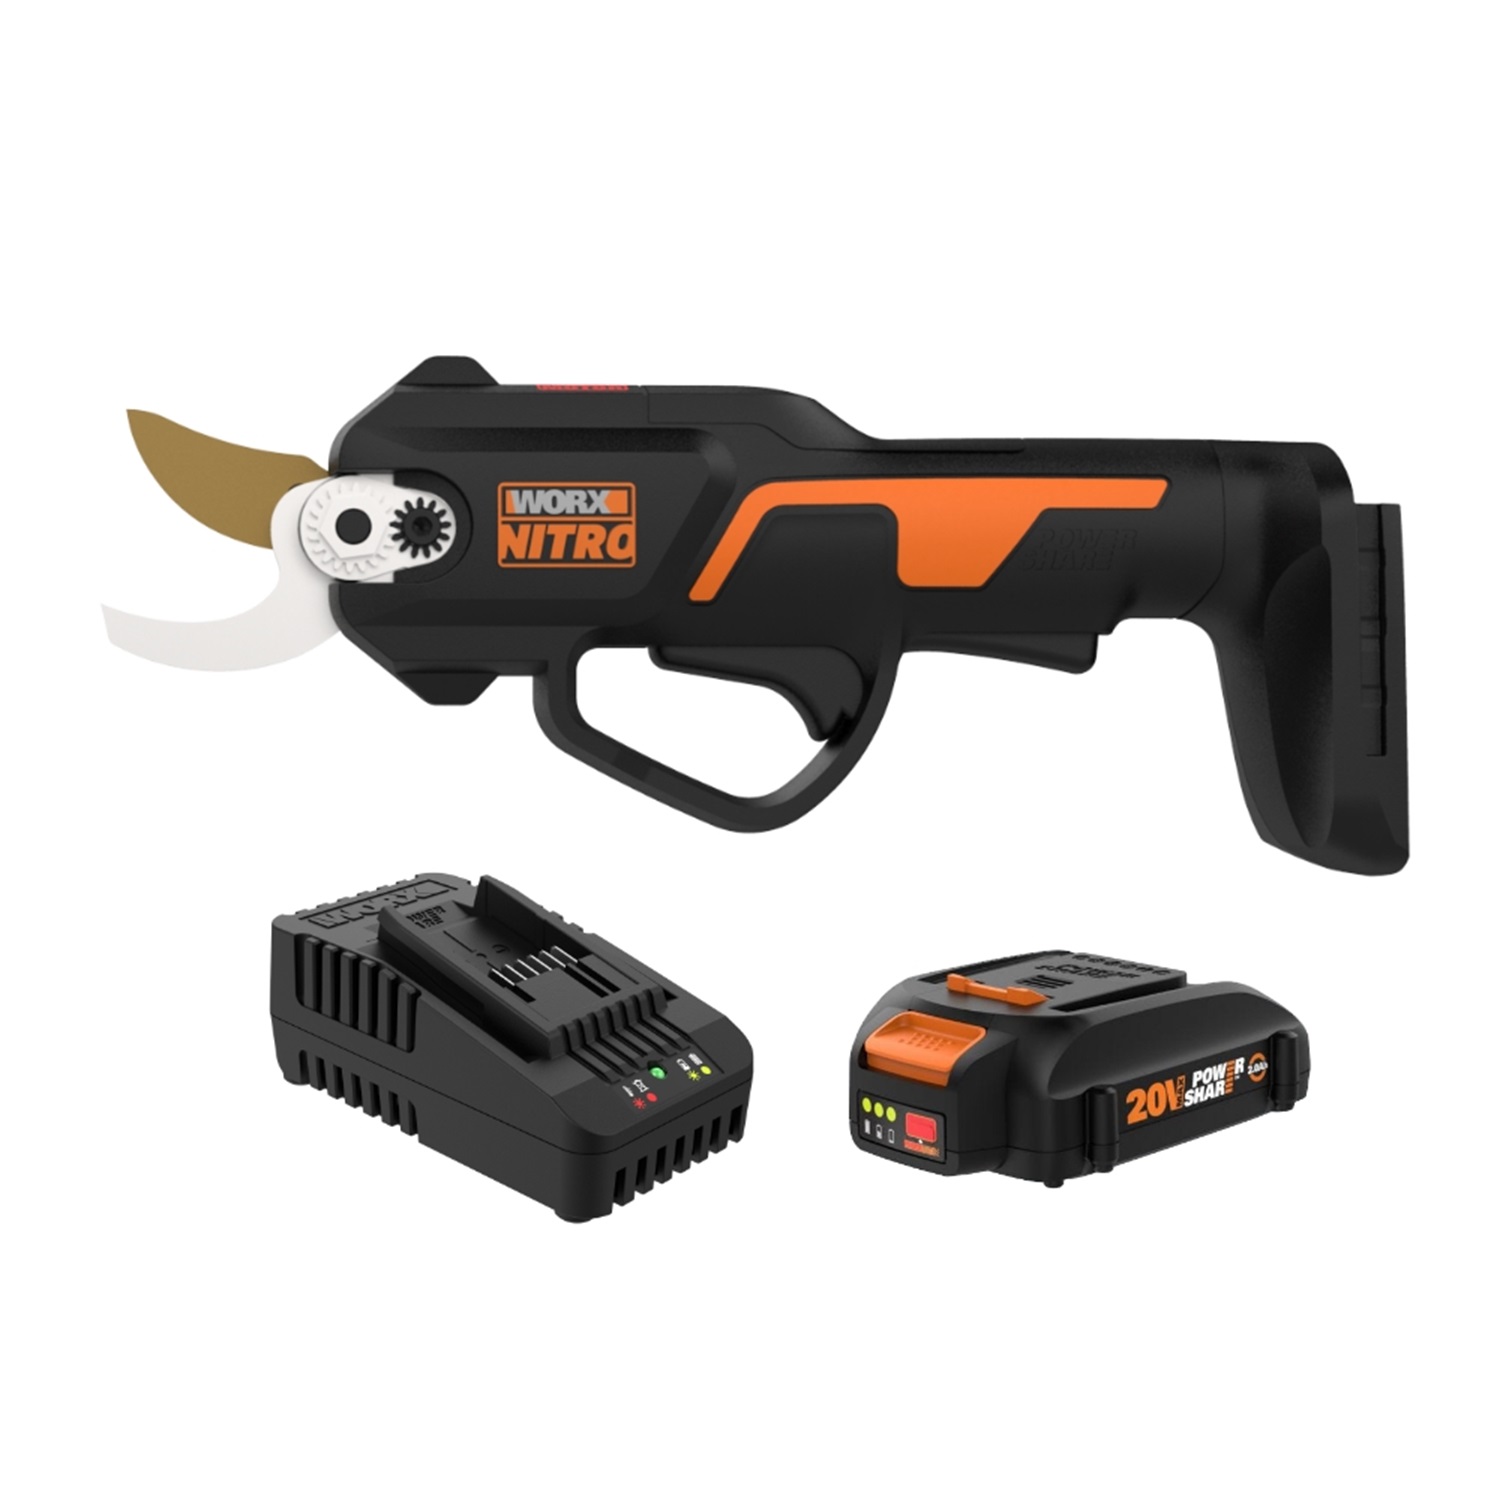 WORX 2-Tool Brushless Power Tool Combo Kit with Soft Case (2-Batteries  Included and Charger Included)